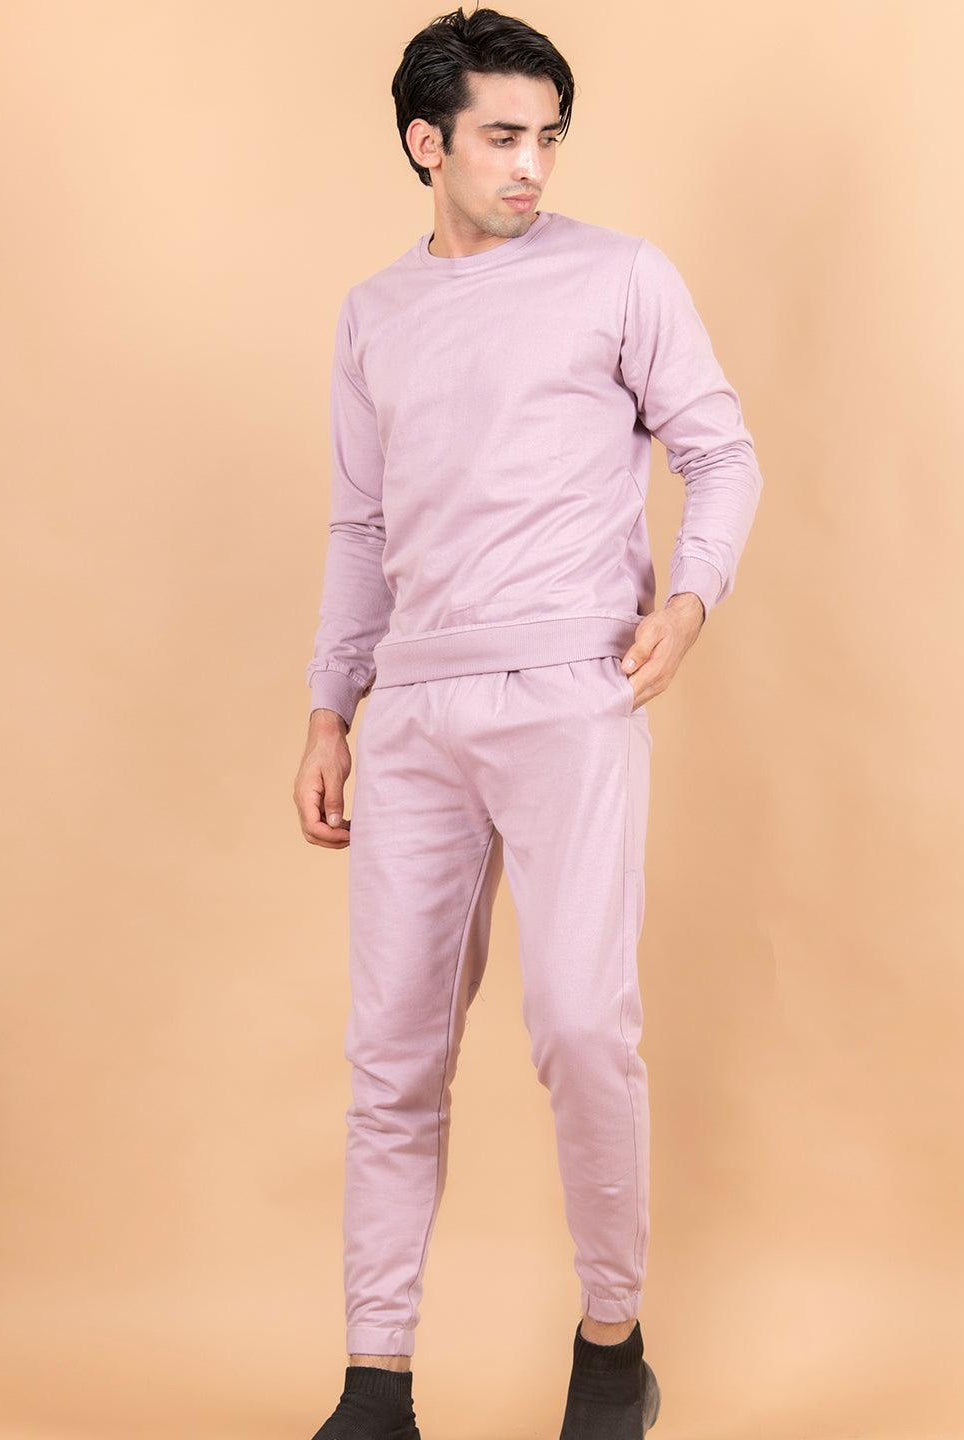 Solid Lilac Sweatshirt Pattern with Shorts Co-Ord Set - Tistabene